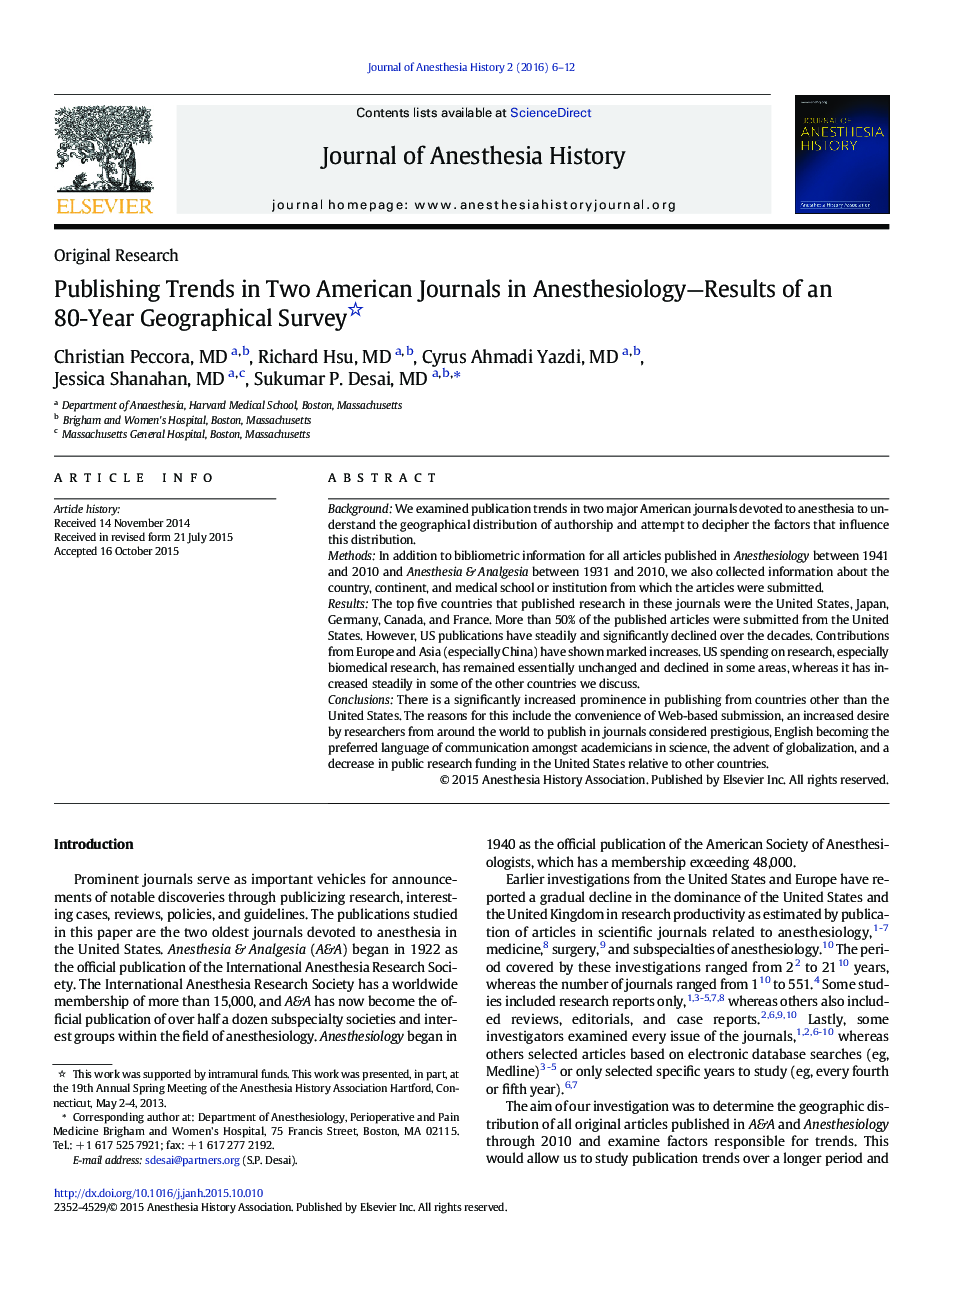 Publishing Trends in Two American Journals in Anesthesiology—Results of an 80-Year Geographical Survey 